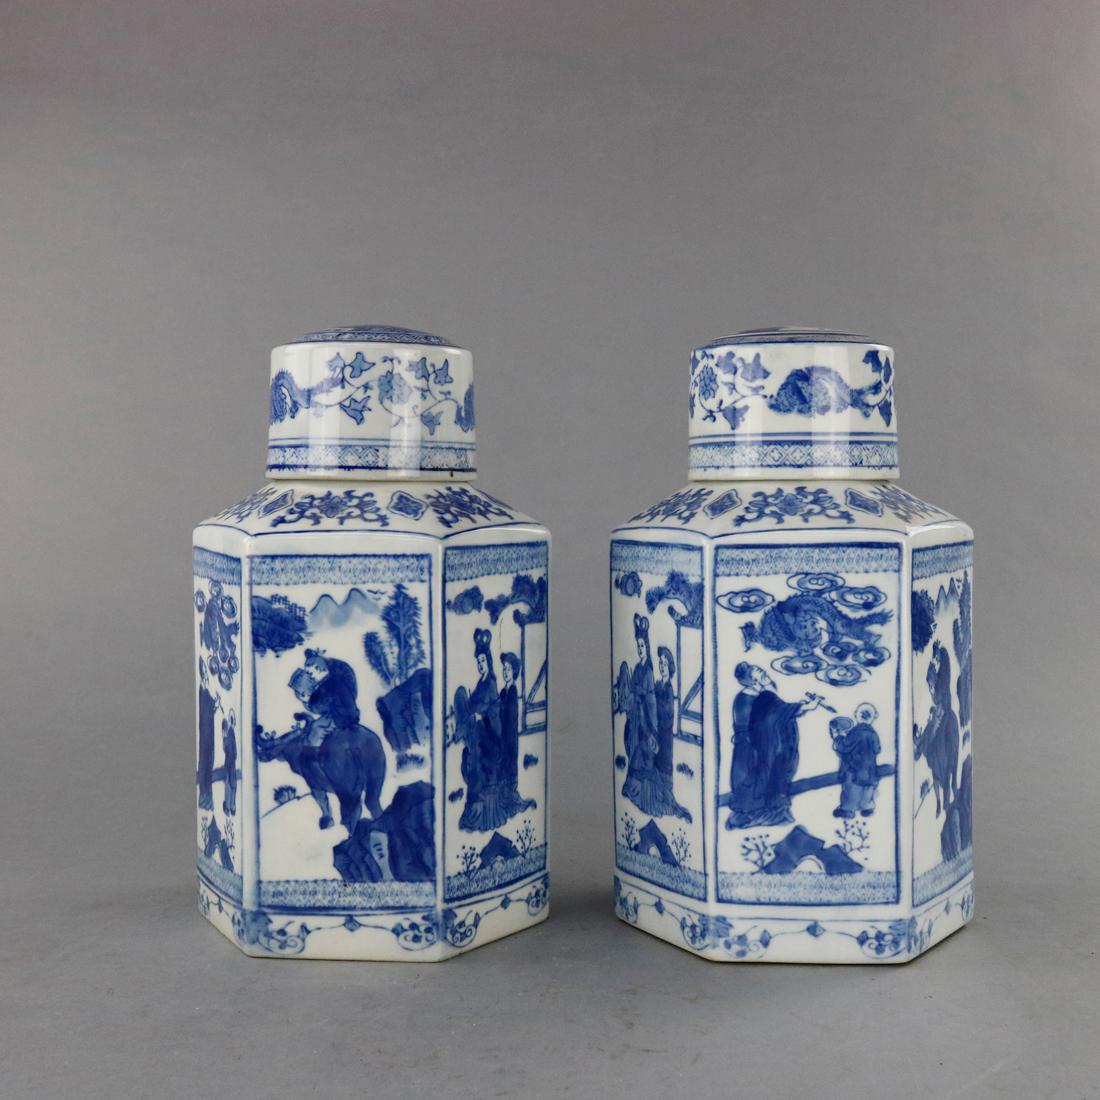 A pair of vintage Chinese blue and white Canton School ginger jars offer paneled porcelain construction with genre scenes having figures in countryside setting, label on bases as photographed, 20th century

Measures: 10.5